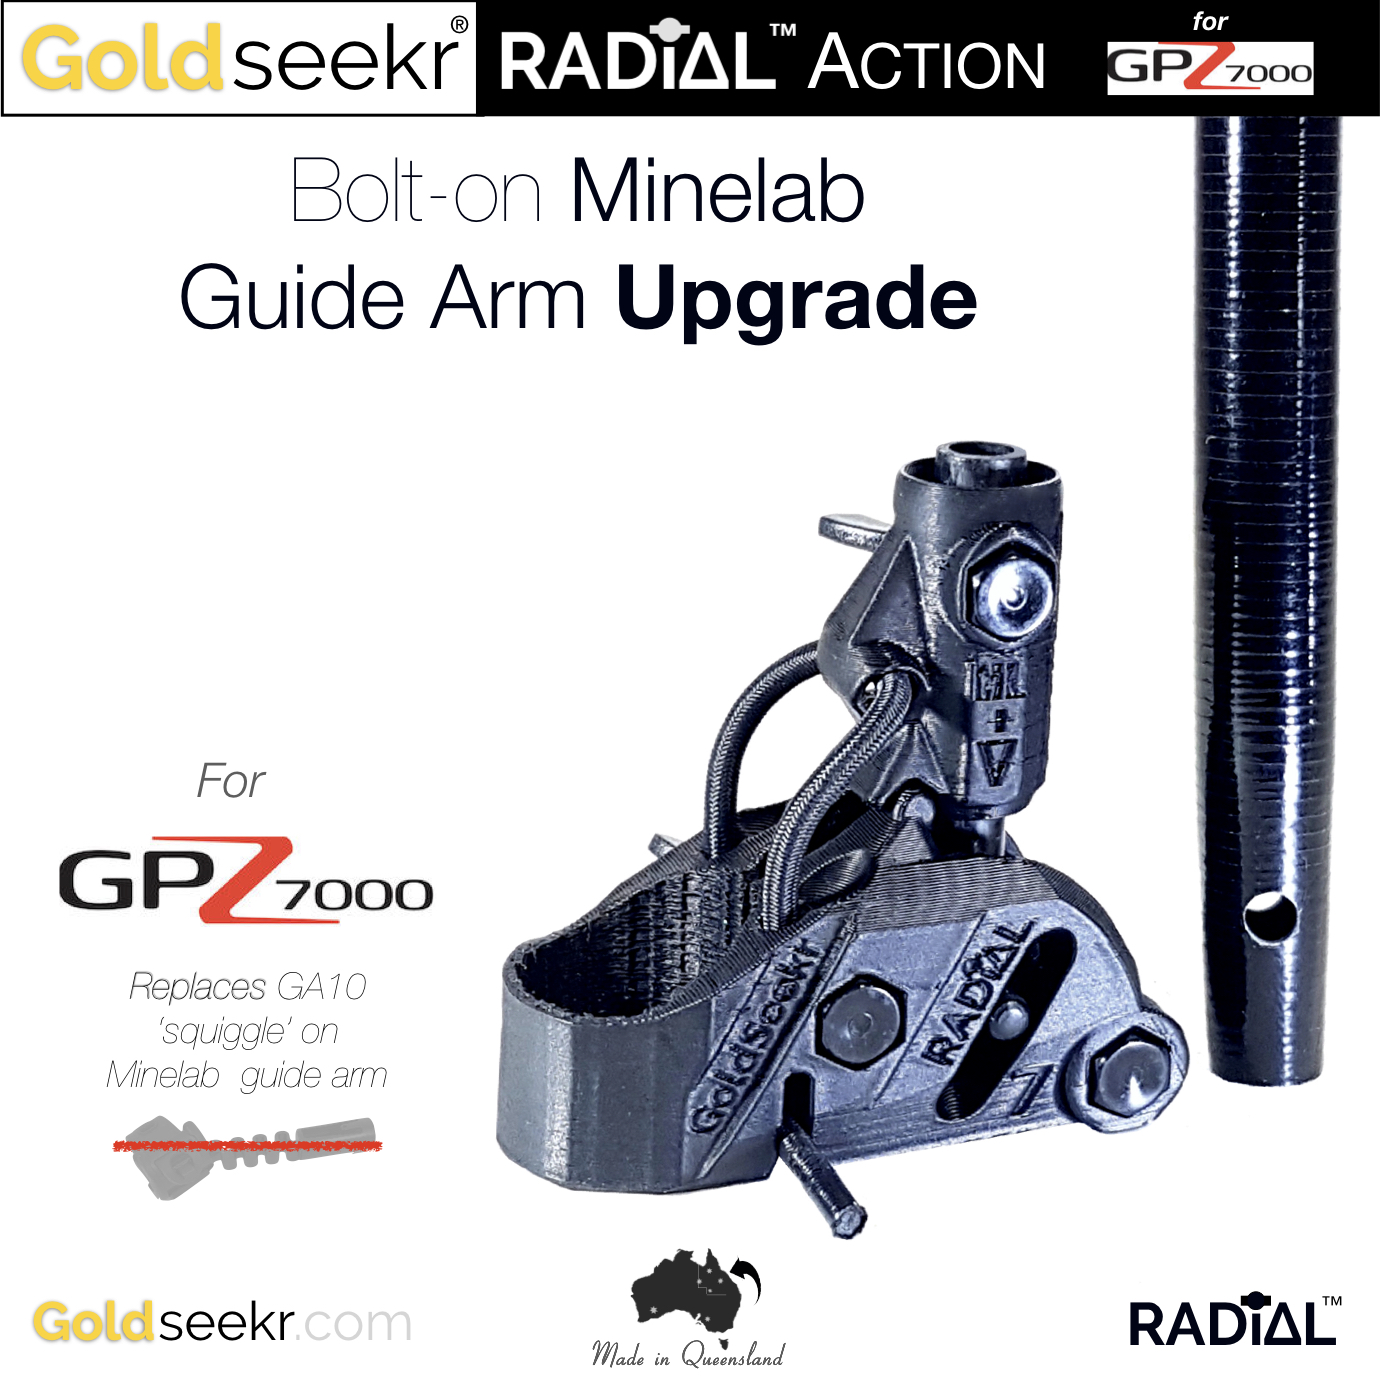 Goldseekr-RADiAL-Action-Minelab-Guide-Arm-GA10-Bolt-on-SQUIGGLE-Accessory-UpGrade-for-GPZ7000.001-1 Goldseekr ® Metal Detector Accessories